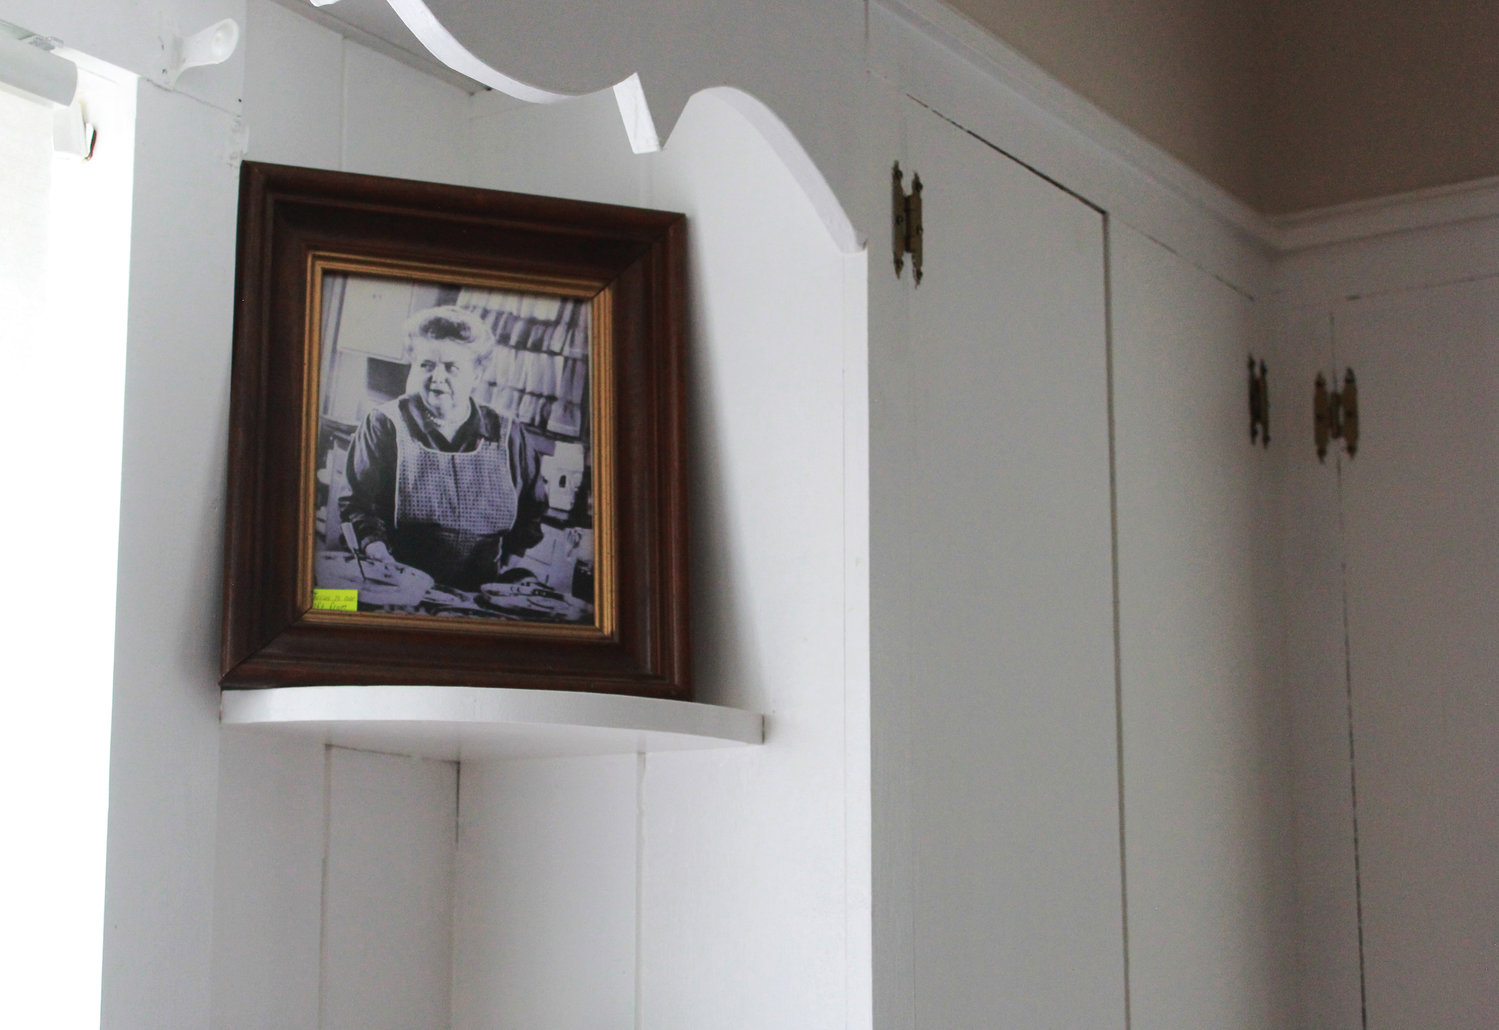 A portrait of former house owner and actress Frances Bavier sits on a shelf in the kitchen of the property formerly known as Aunt Bee’s house in Siler City.